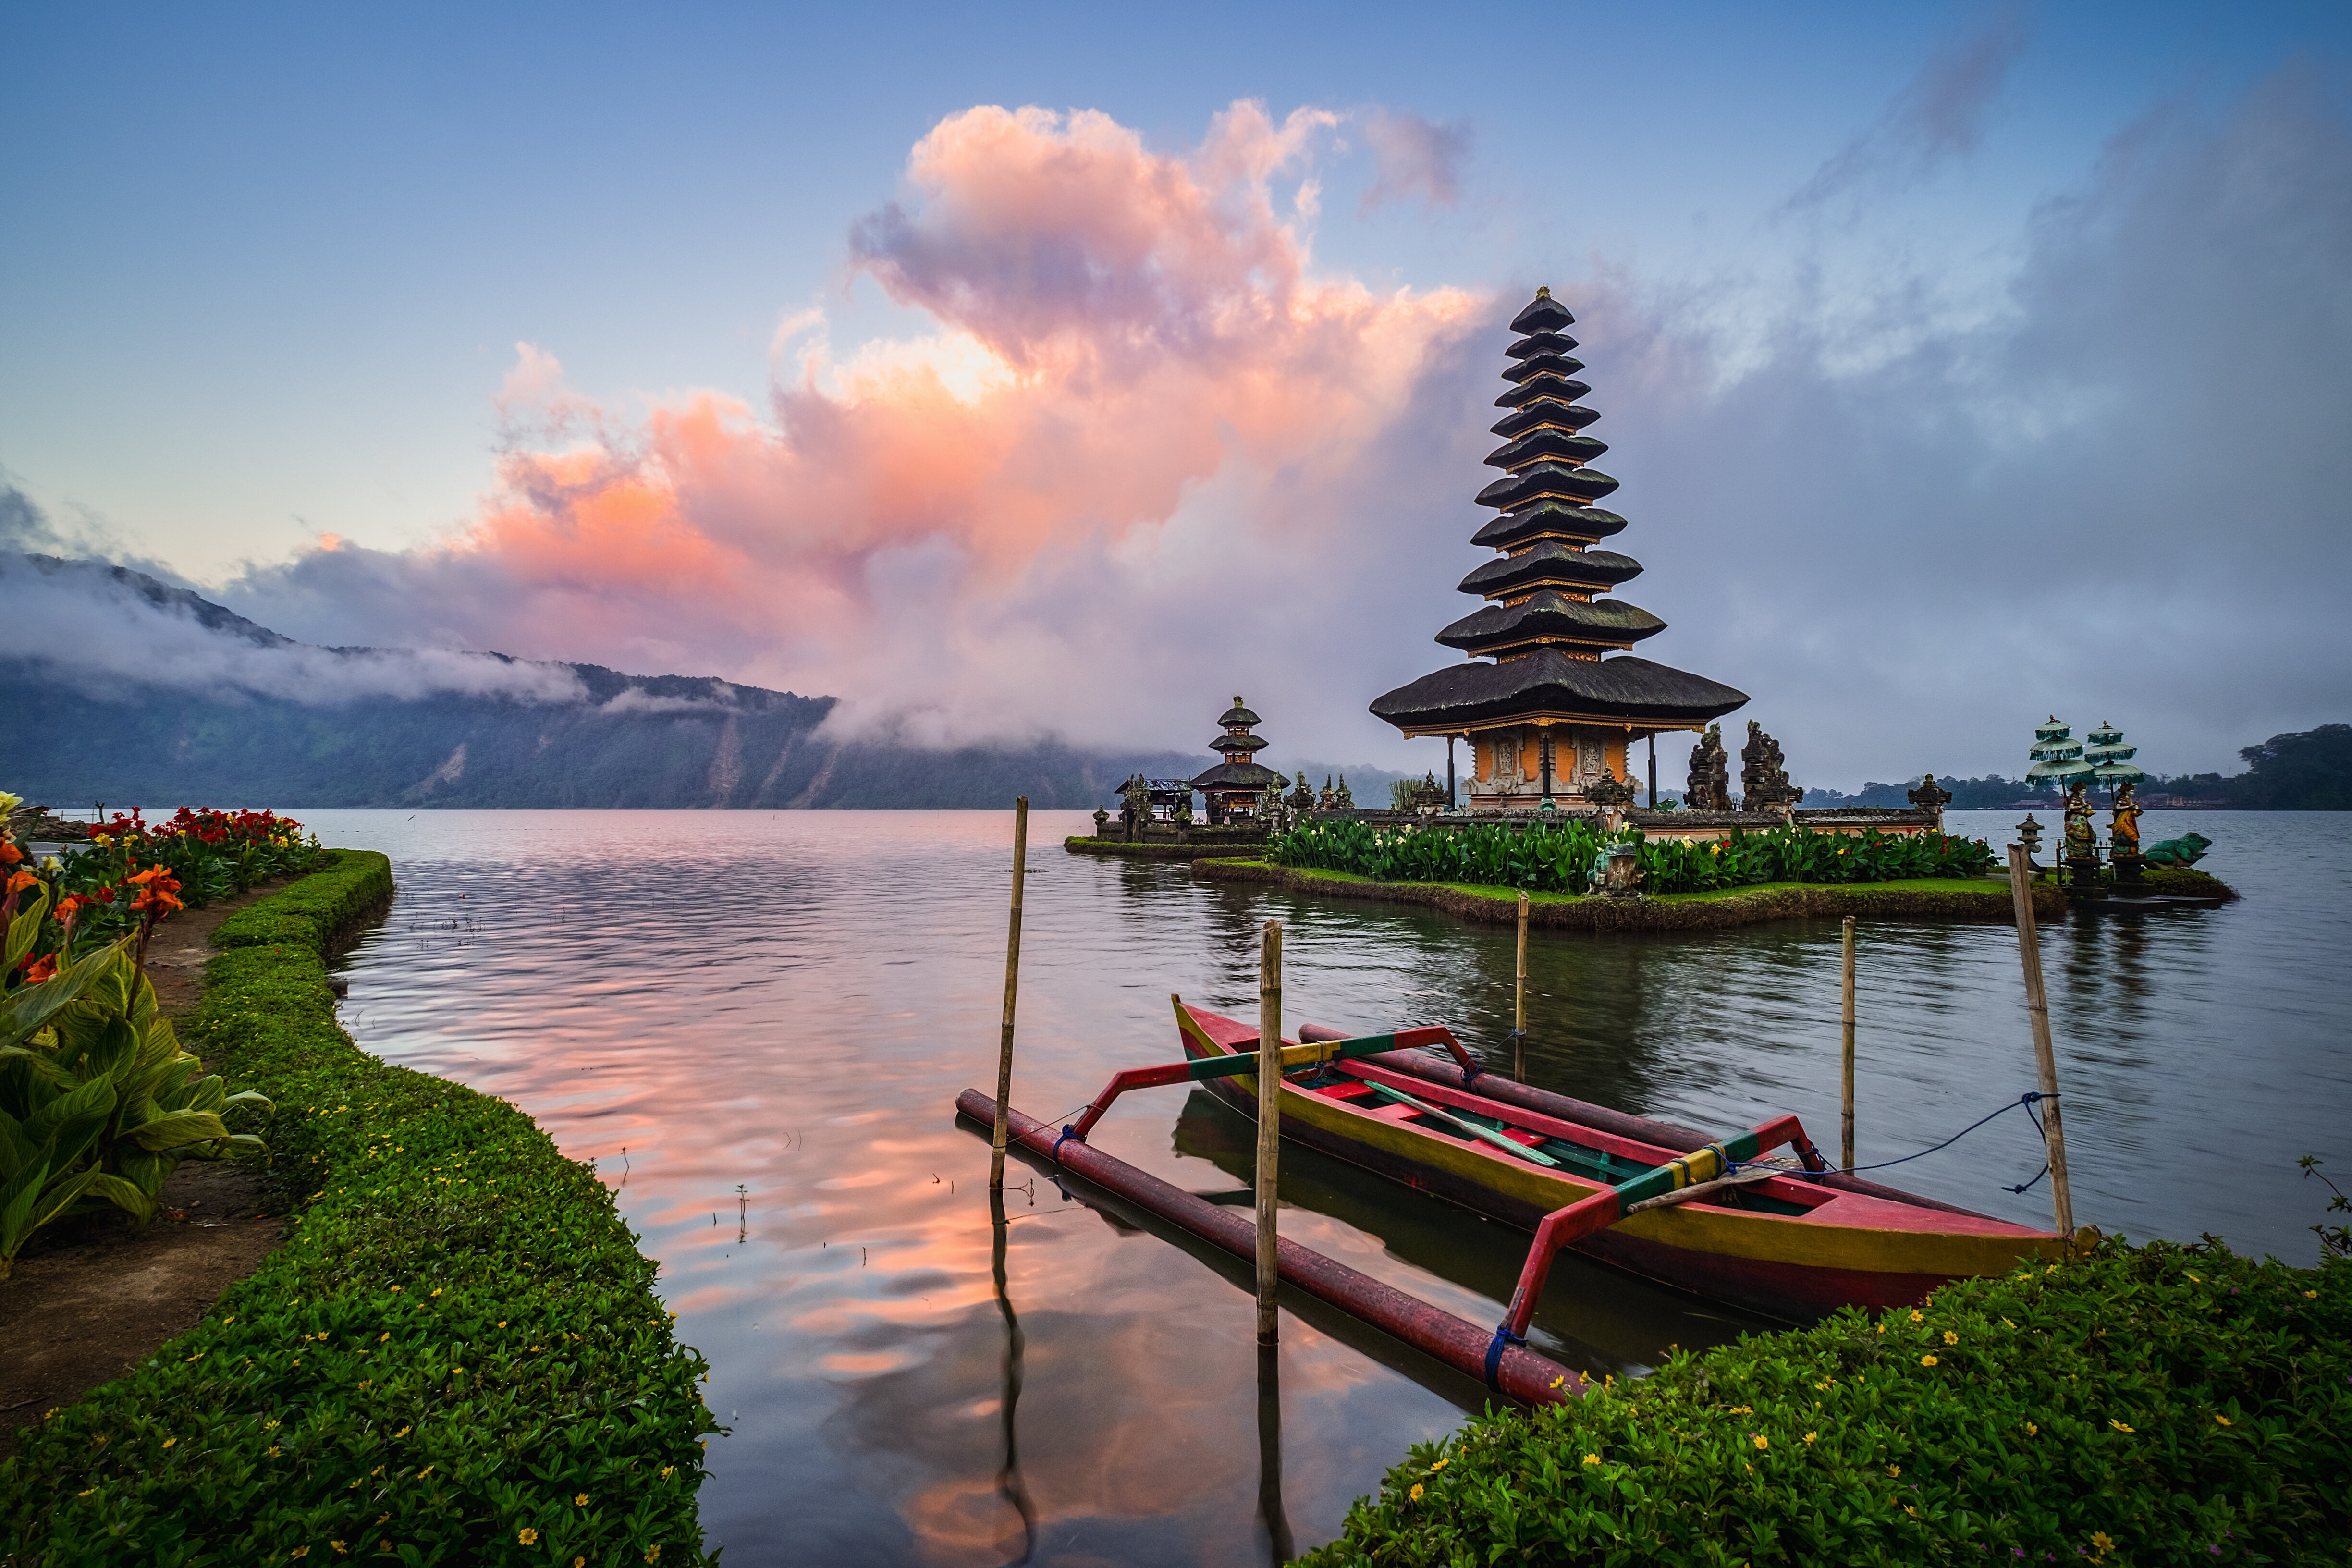 A temple in Bali, Indonesia at dusk